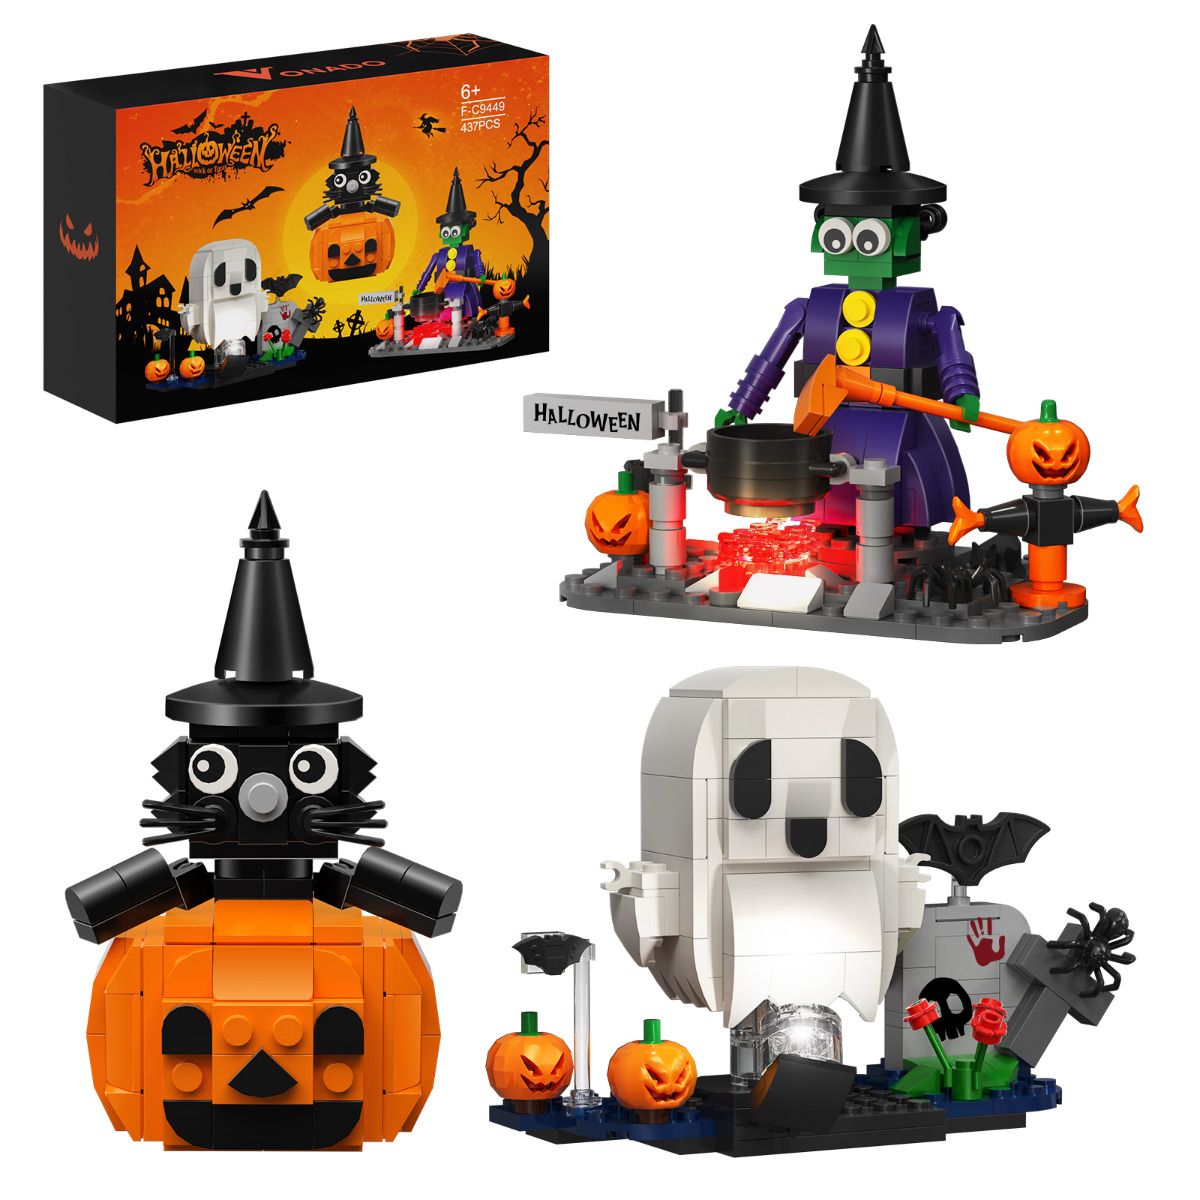 Halloween Square Head Boy with Electricity (437 PCS)